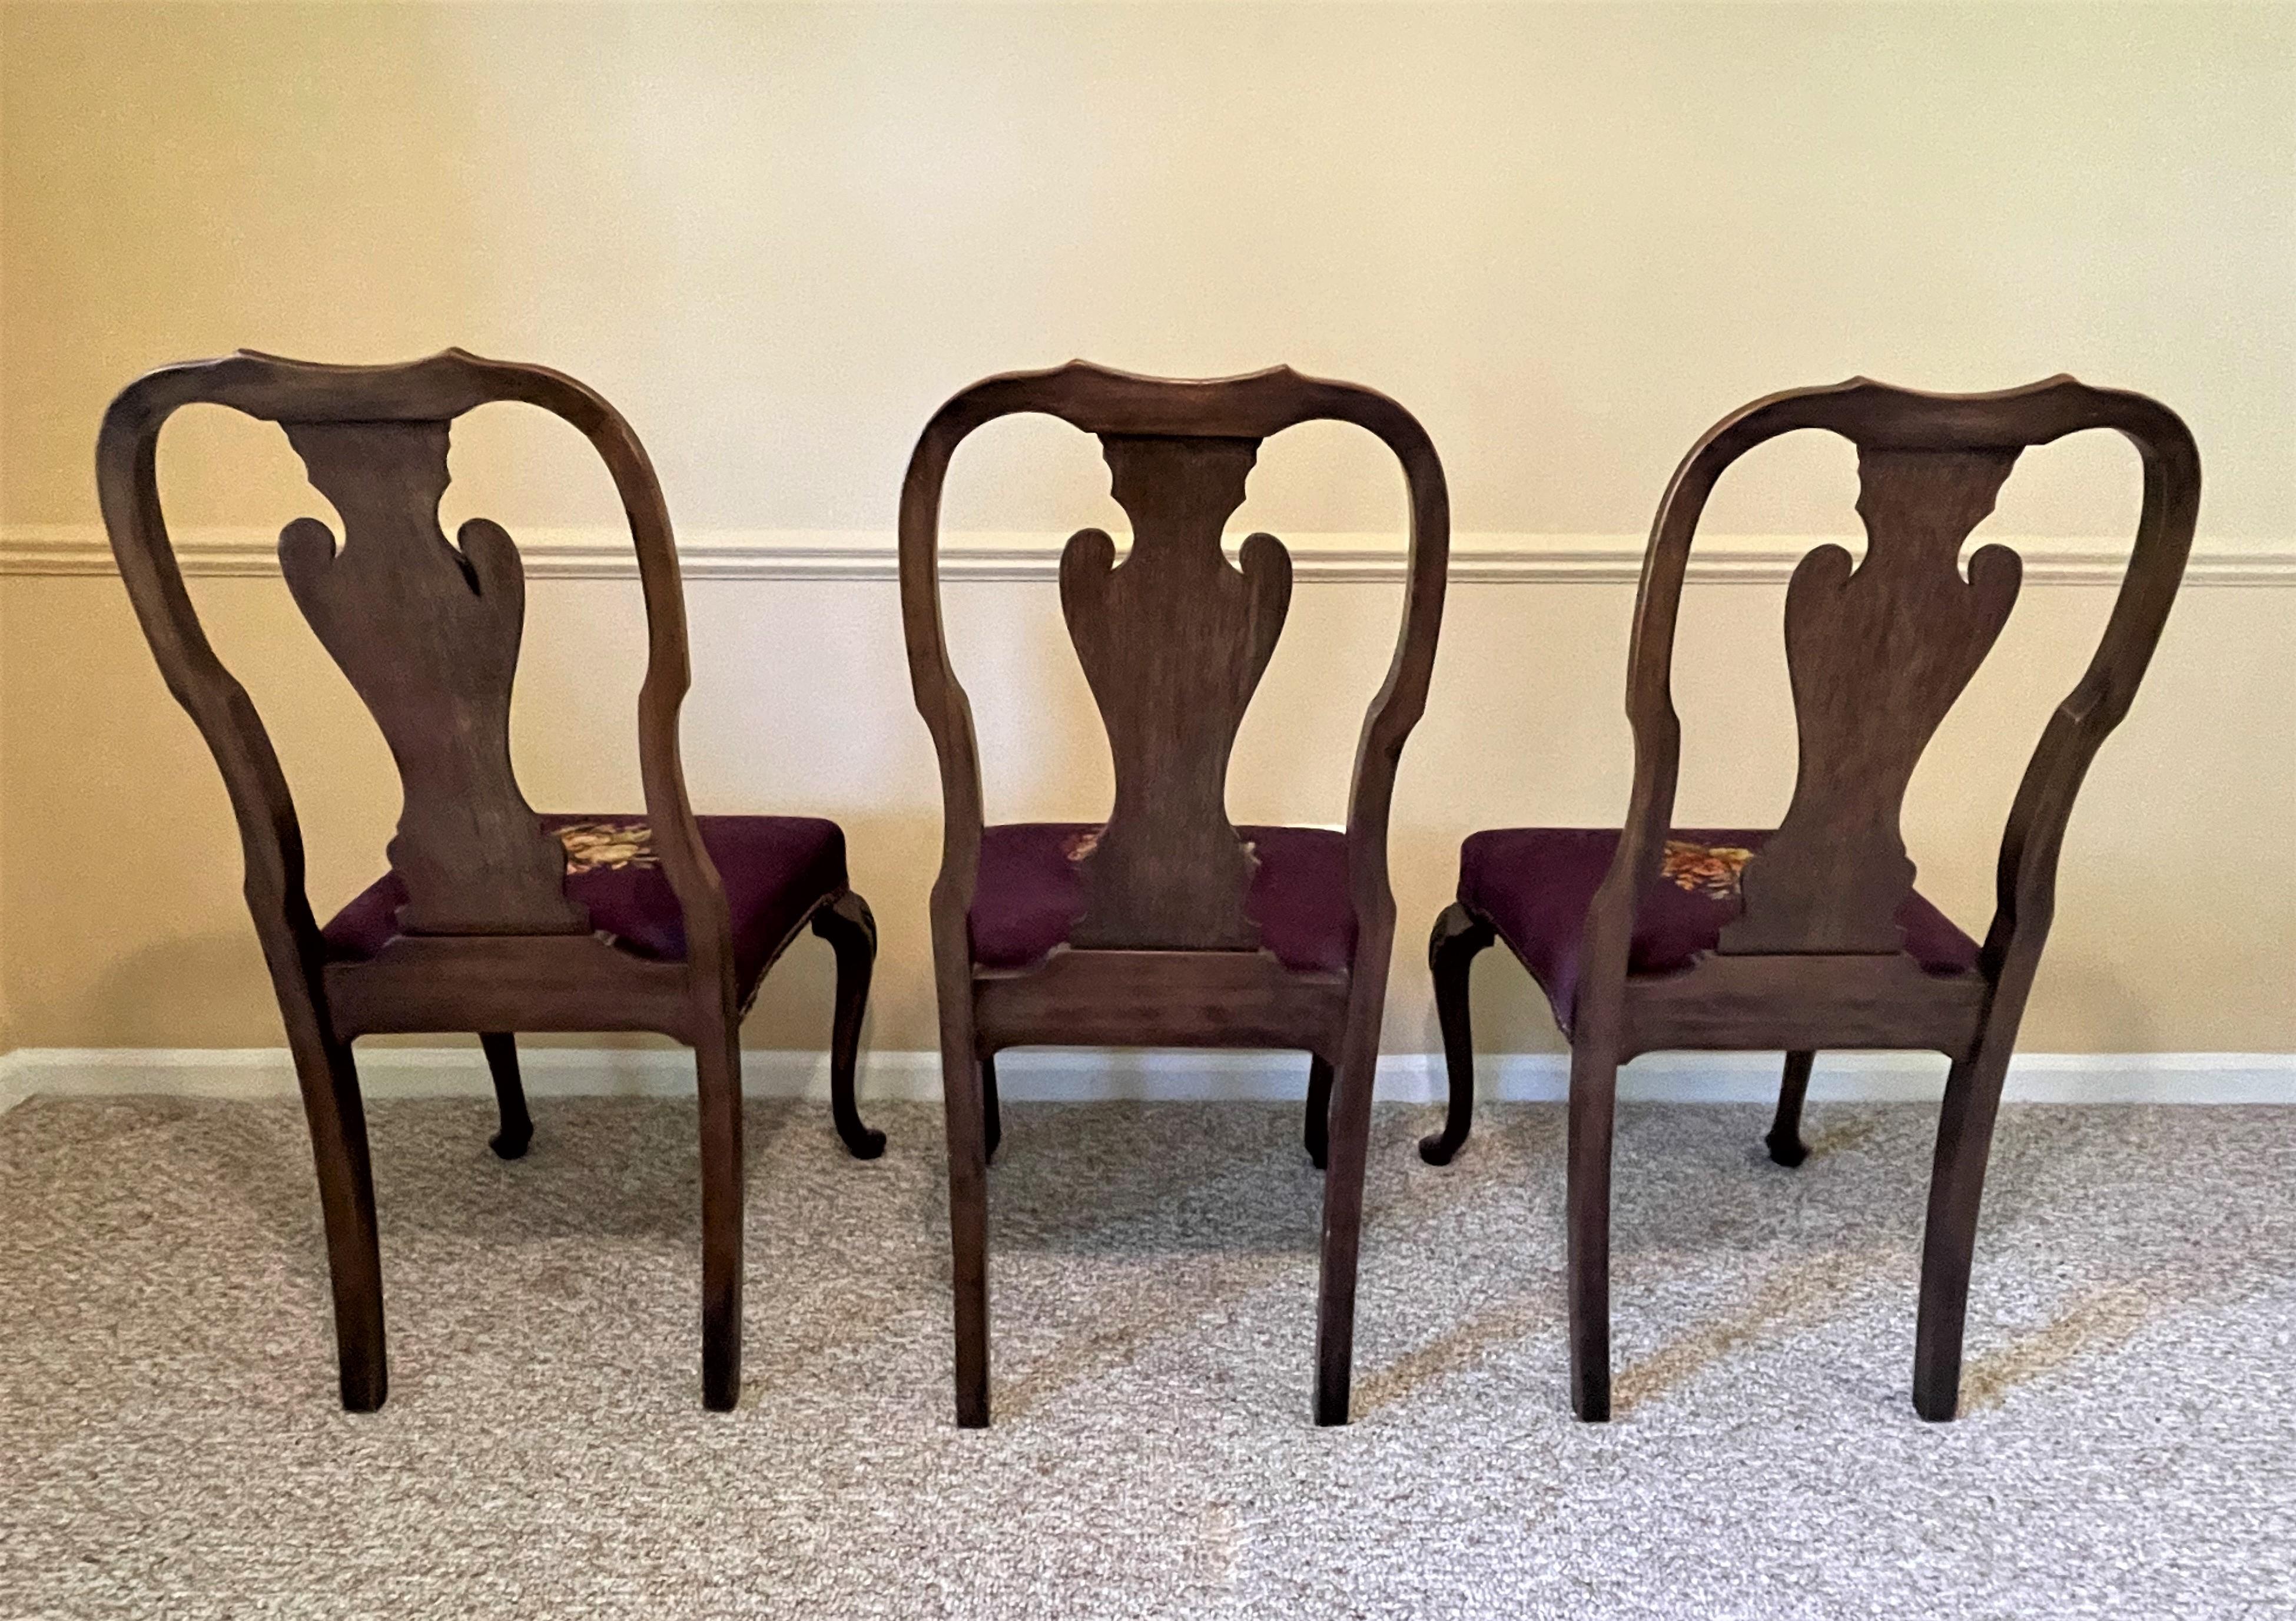 1930s Queen Ann Solid Walnut Dining Chairs with Aubergine Wool Needlepoint Seats In Excellent Condition For Sale In Austin, TX